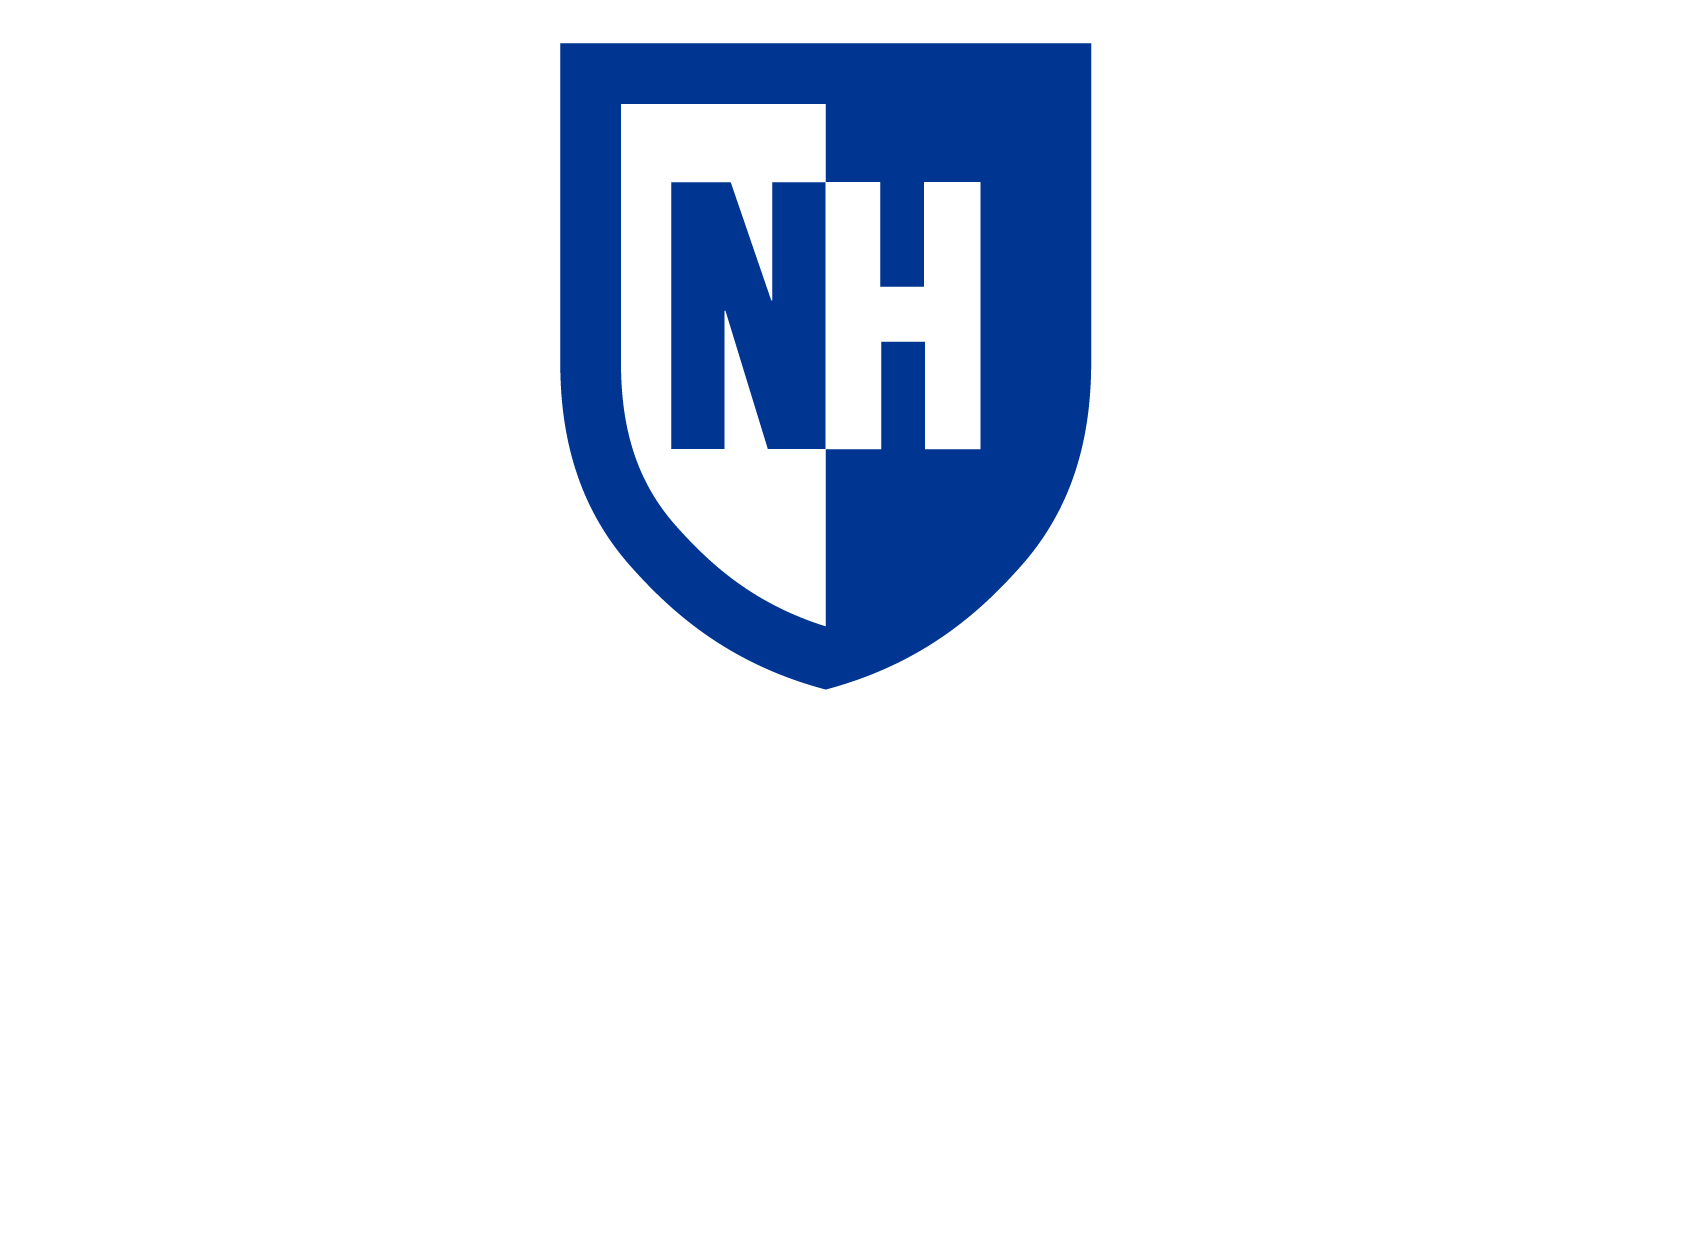 Blue and white UNH shield logo with University of New Hampshire beneath in white text